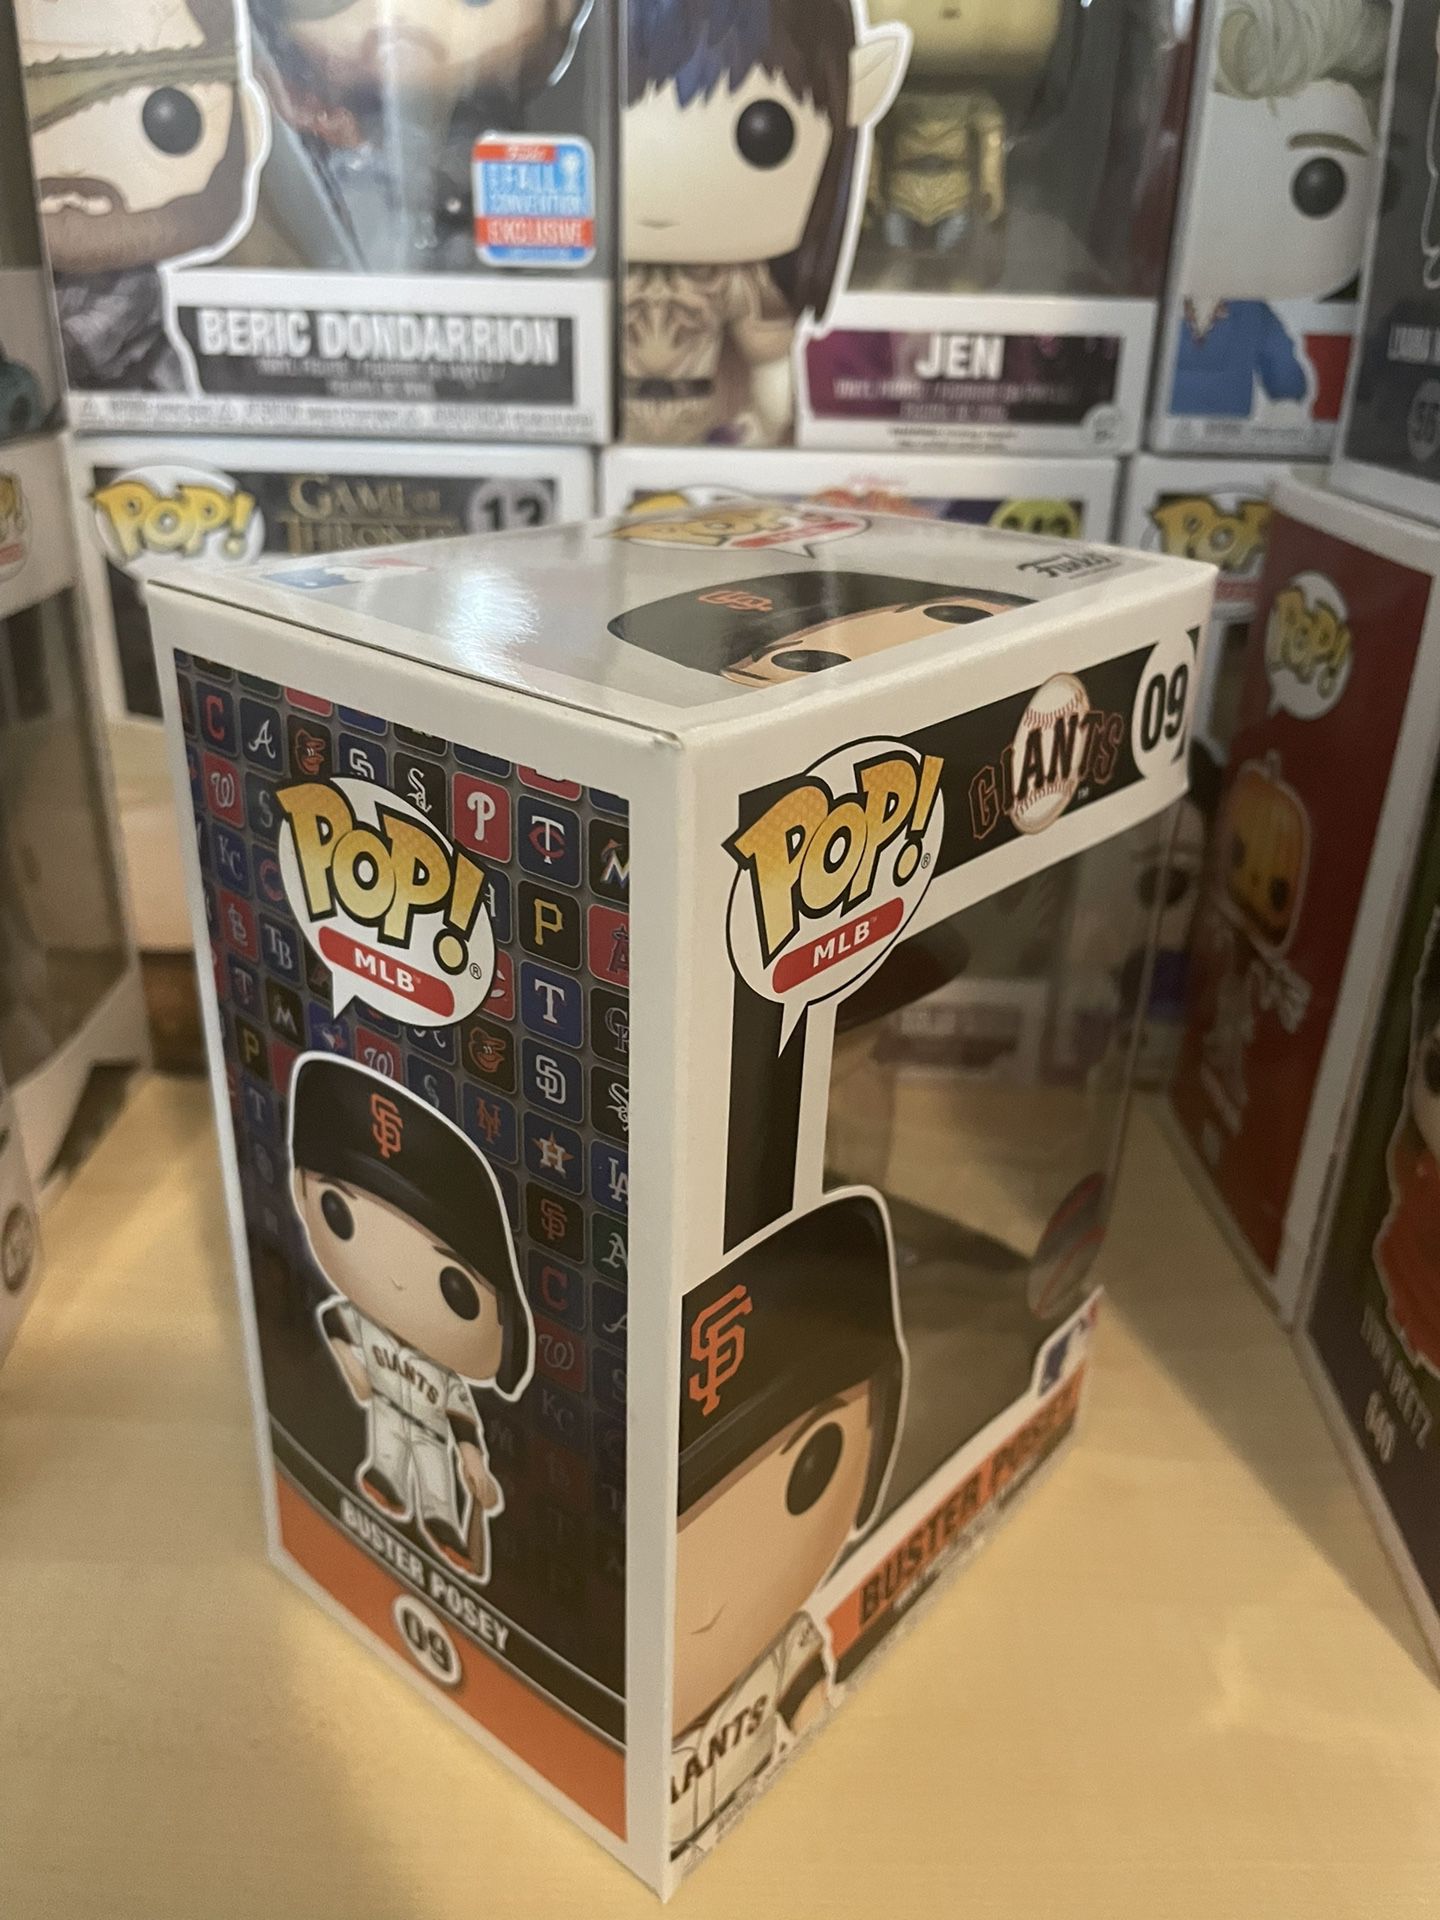 Buster Posey Funko Pop 